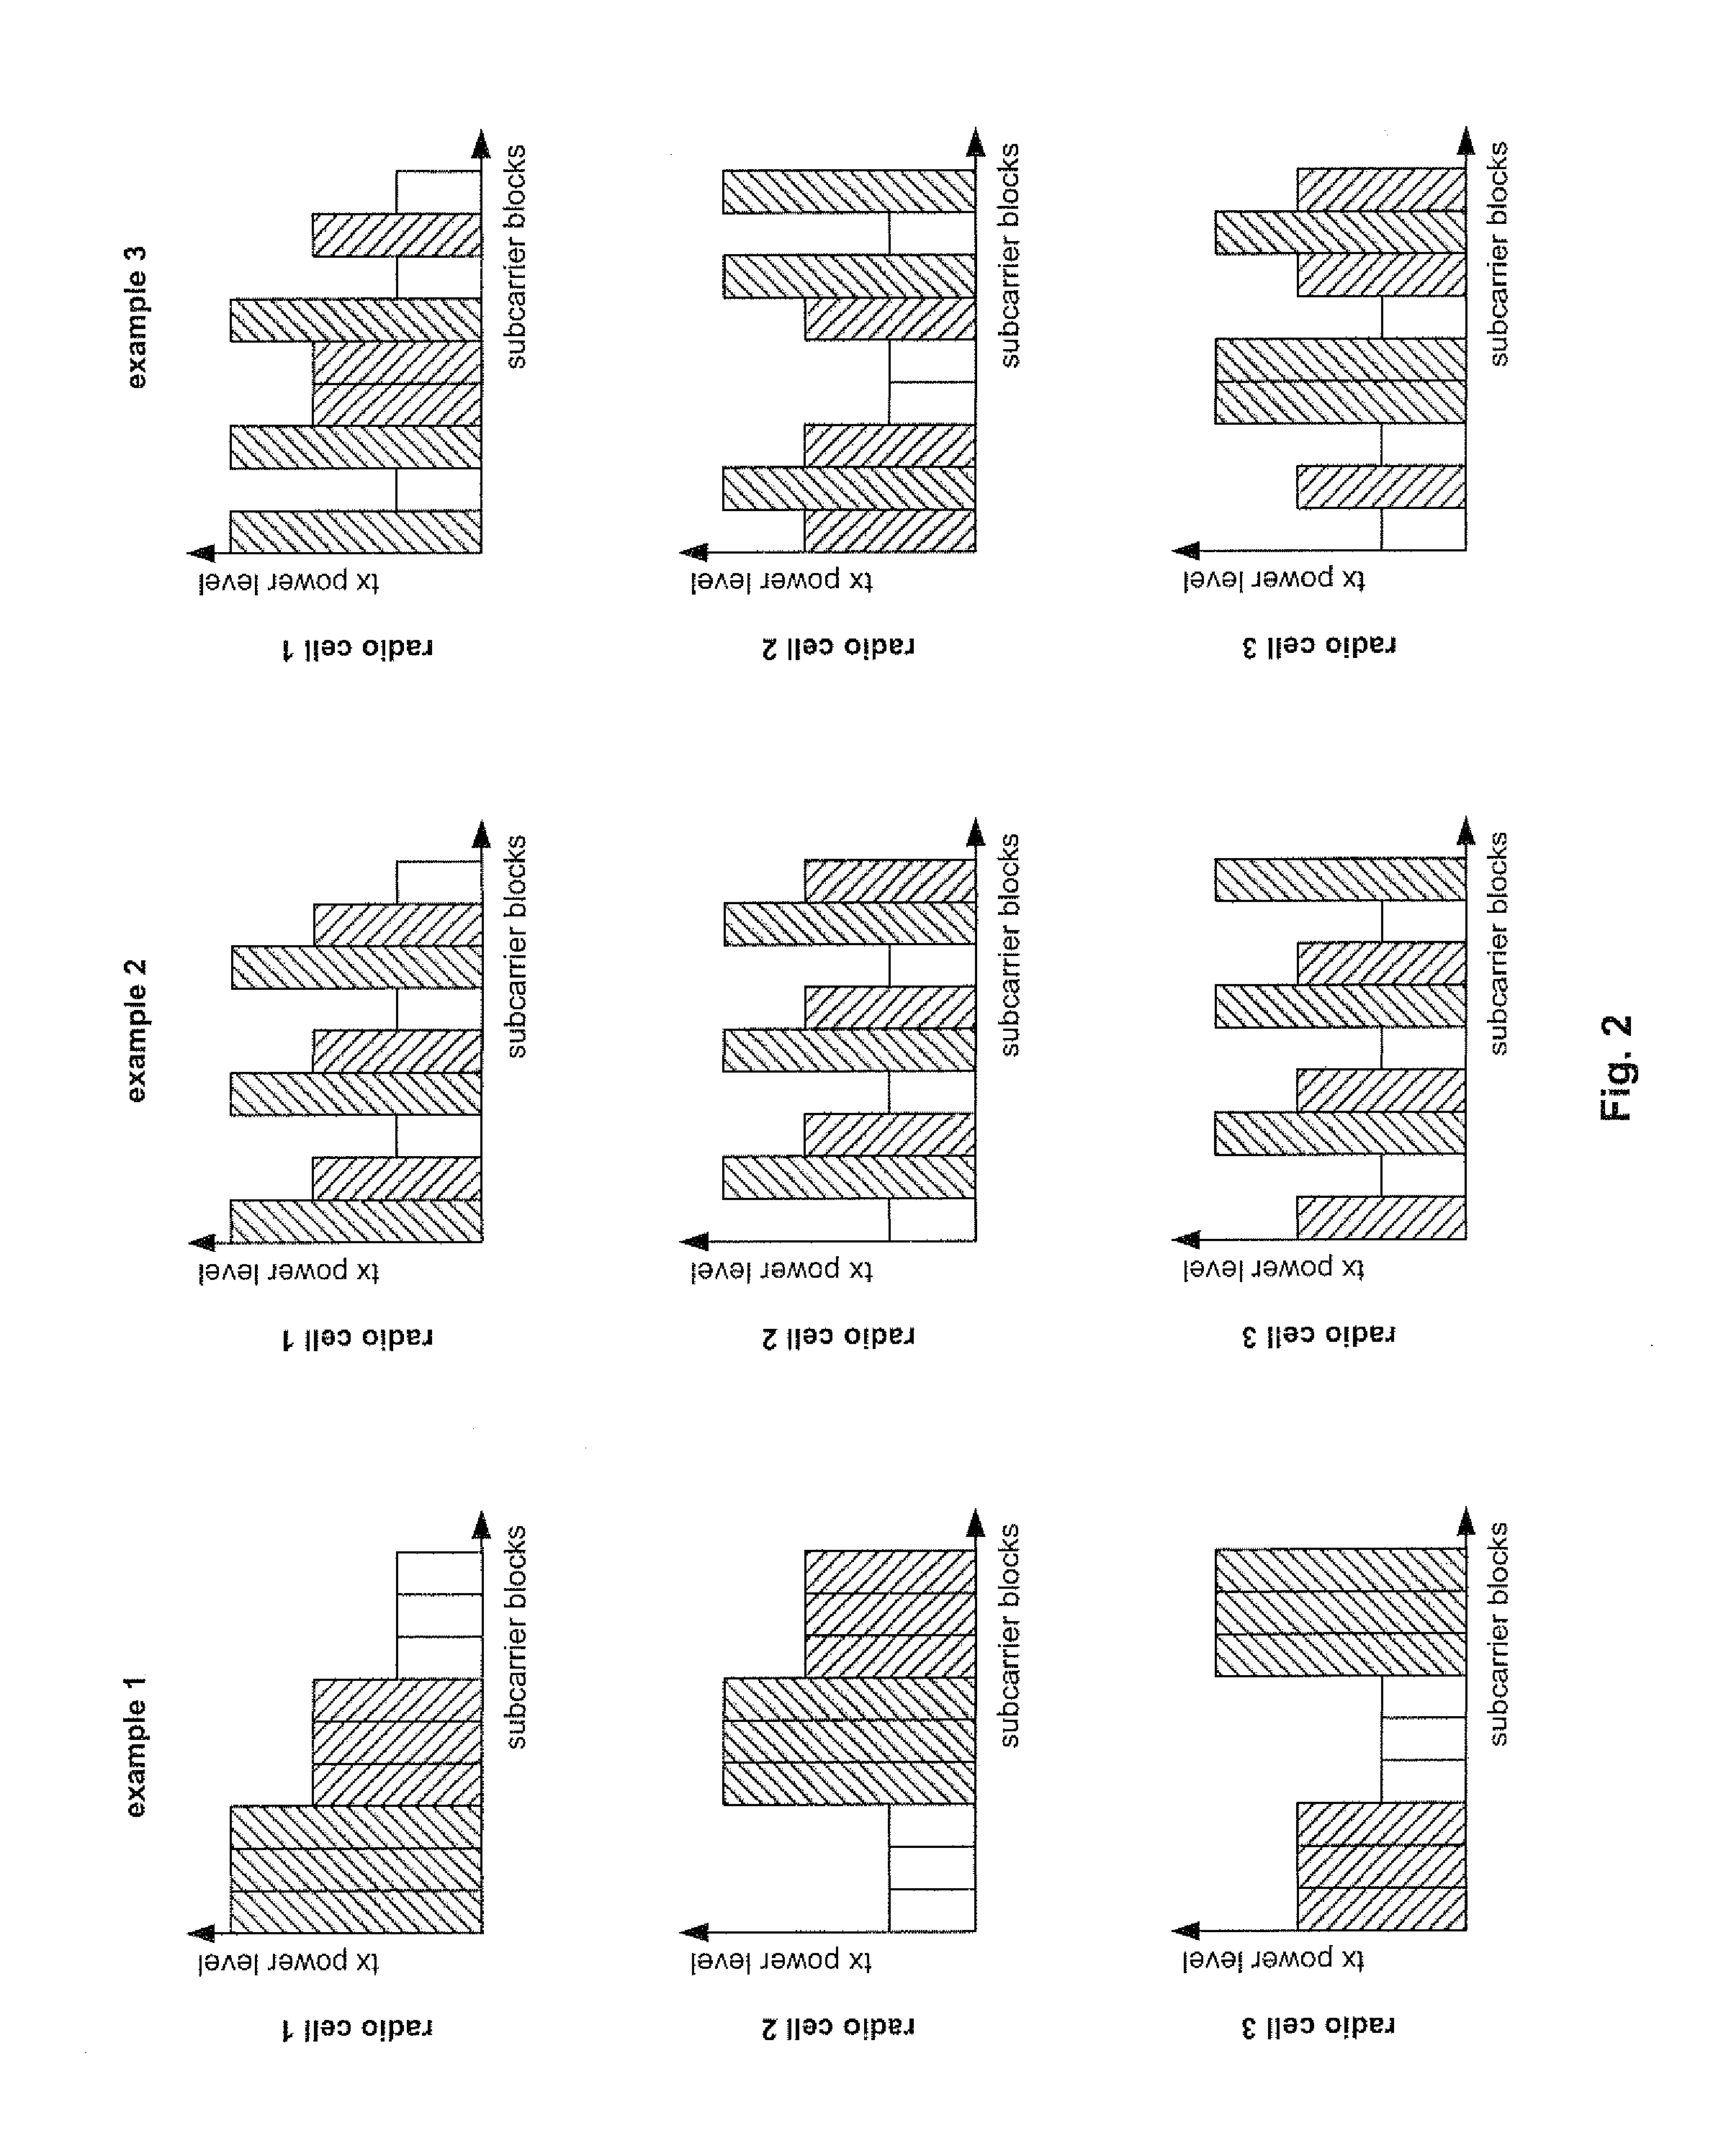 Interference balancing in a wireless communication system